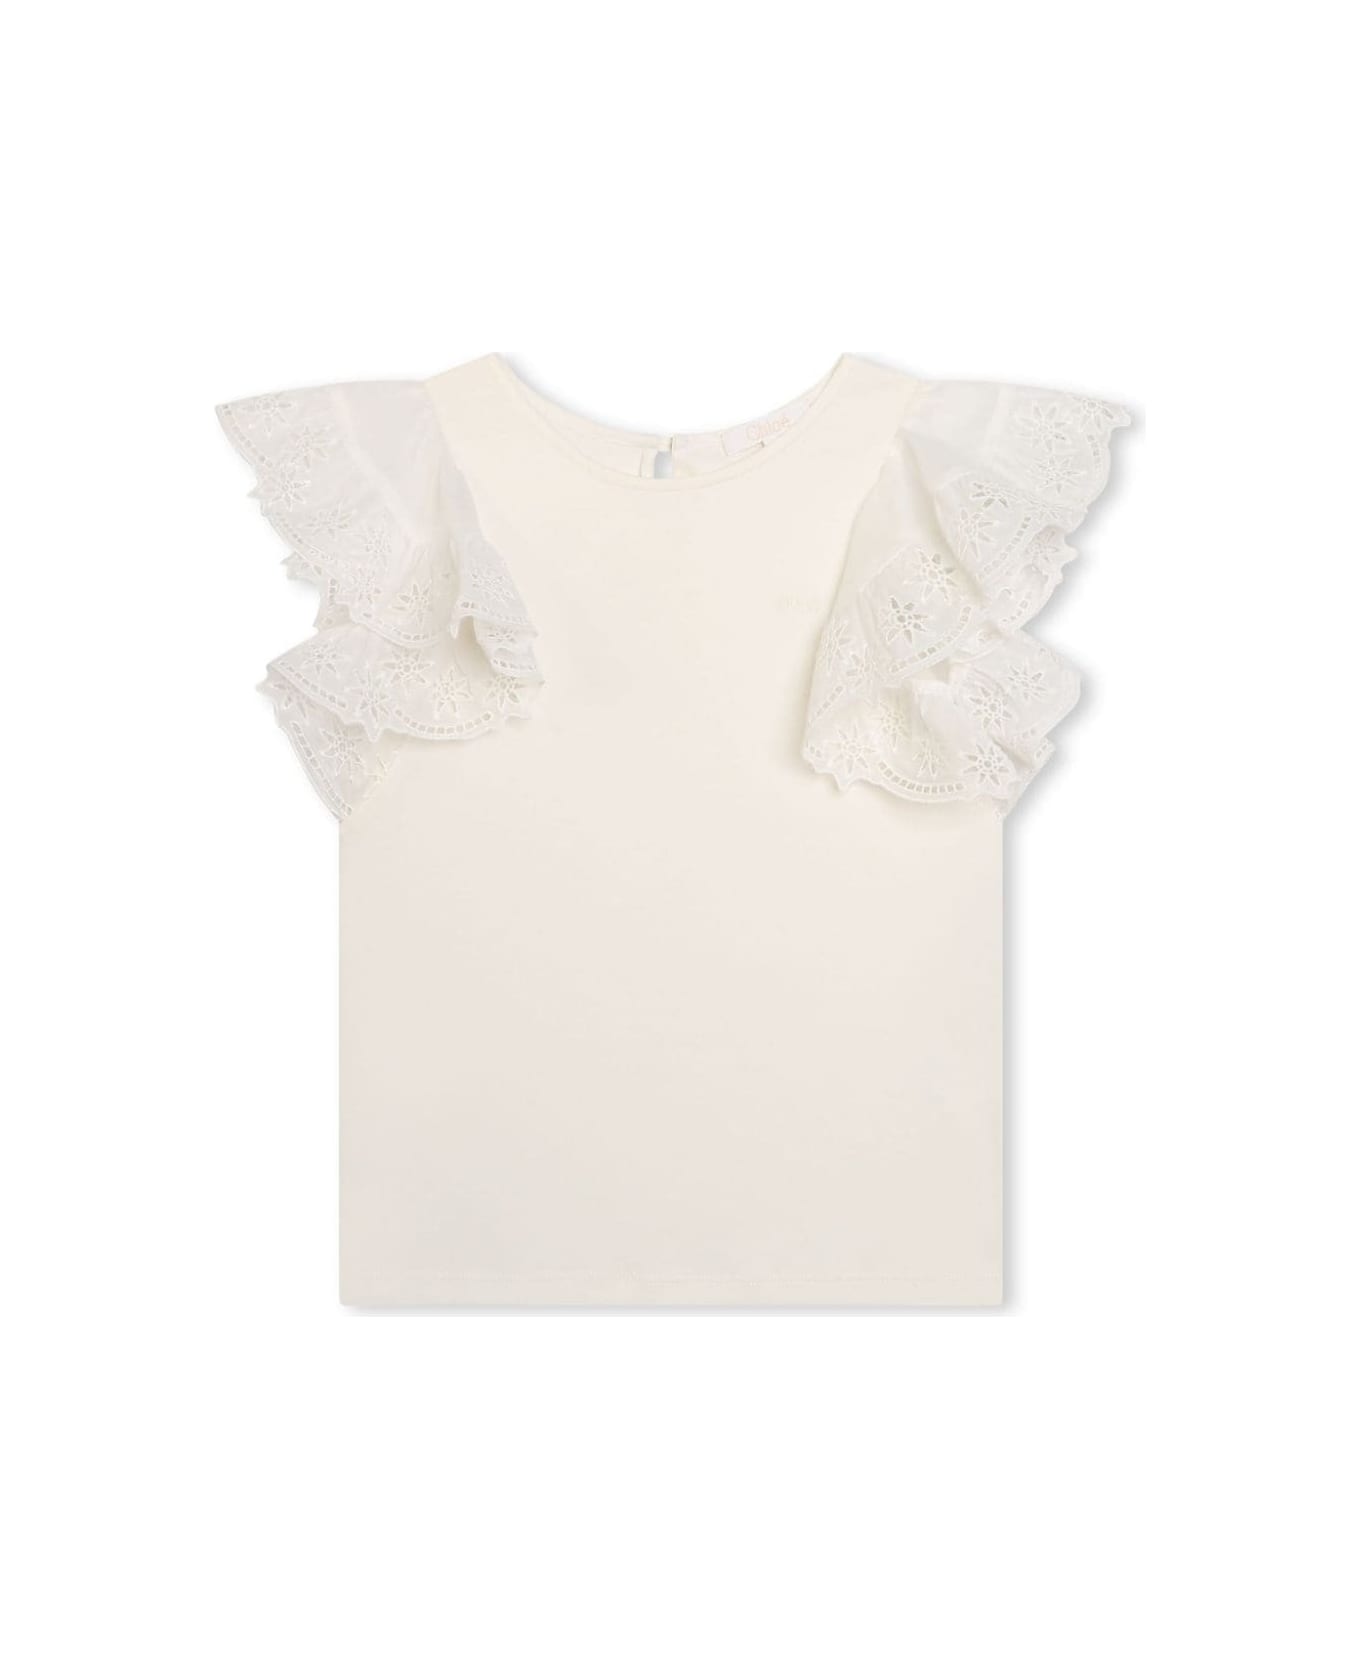 Chloé White Top With Embroidered Ruffles - White